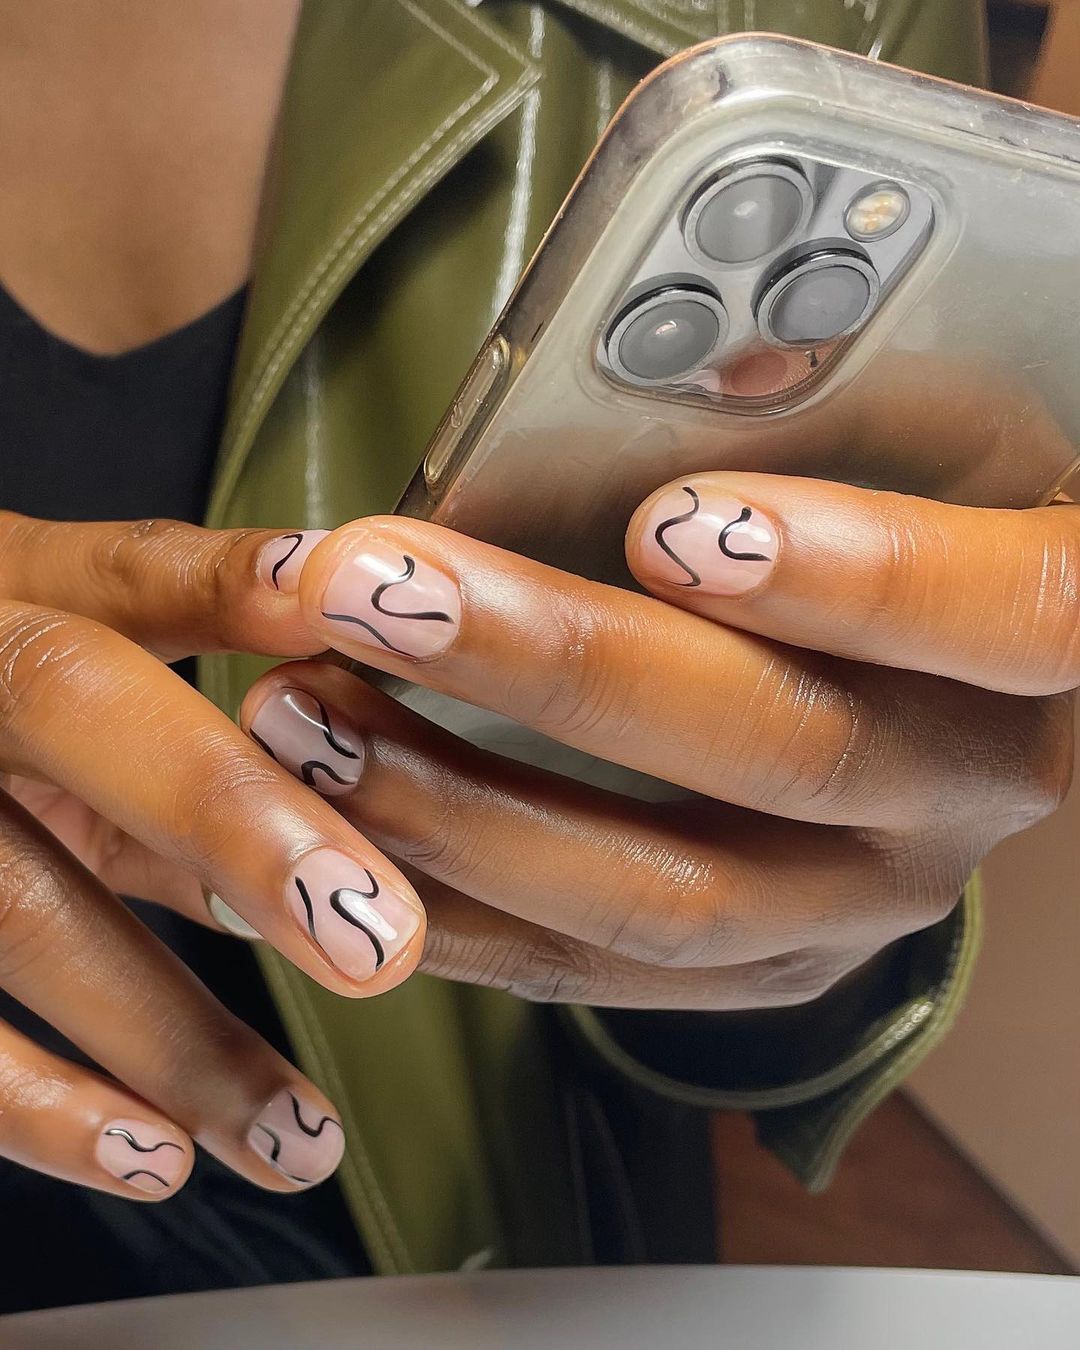 The 12 Prettiest Gel Nail Designs of 2022 | Who What Wear